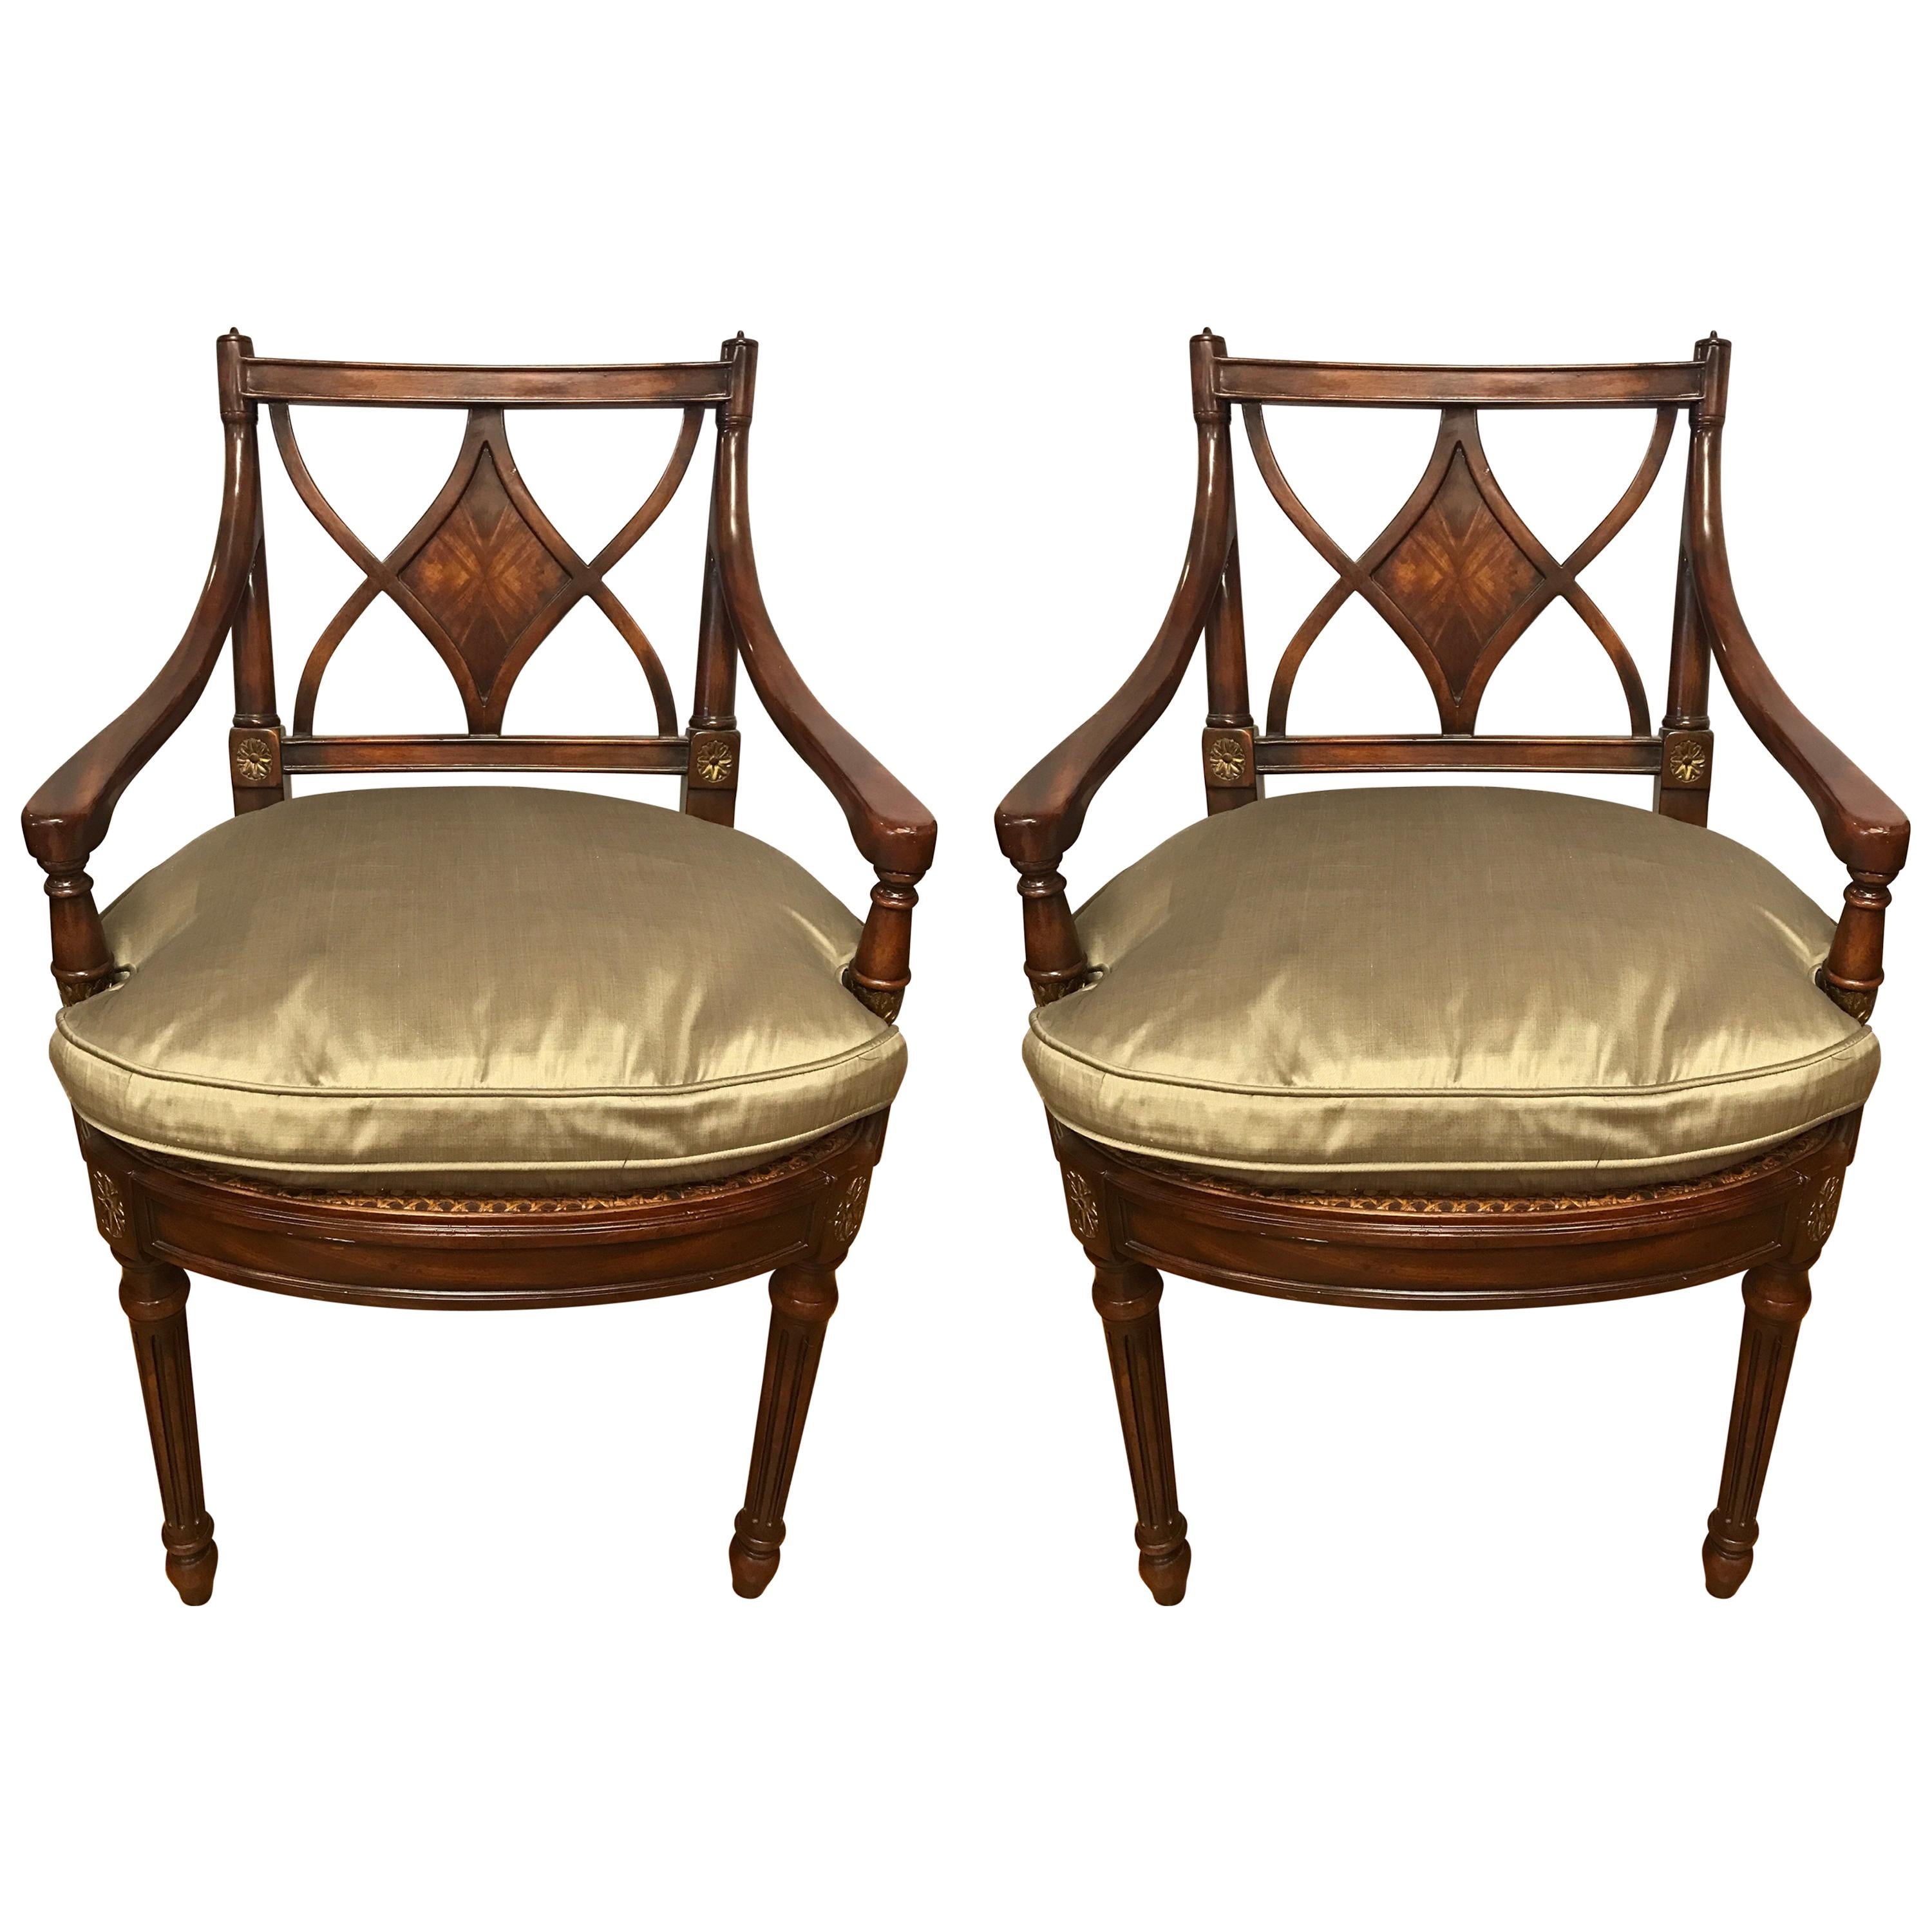 Pair of Theodore Alexander Armchairs Cane Seat